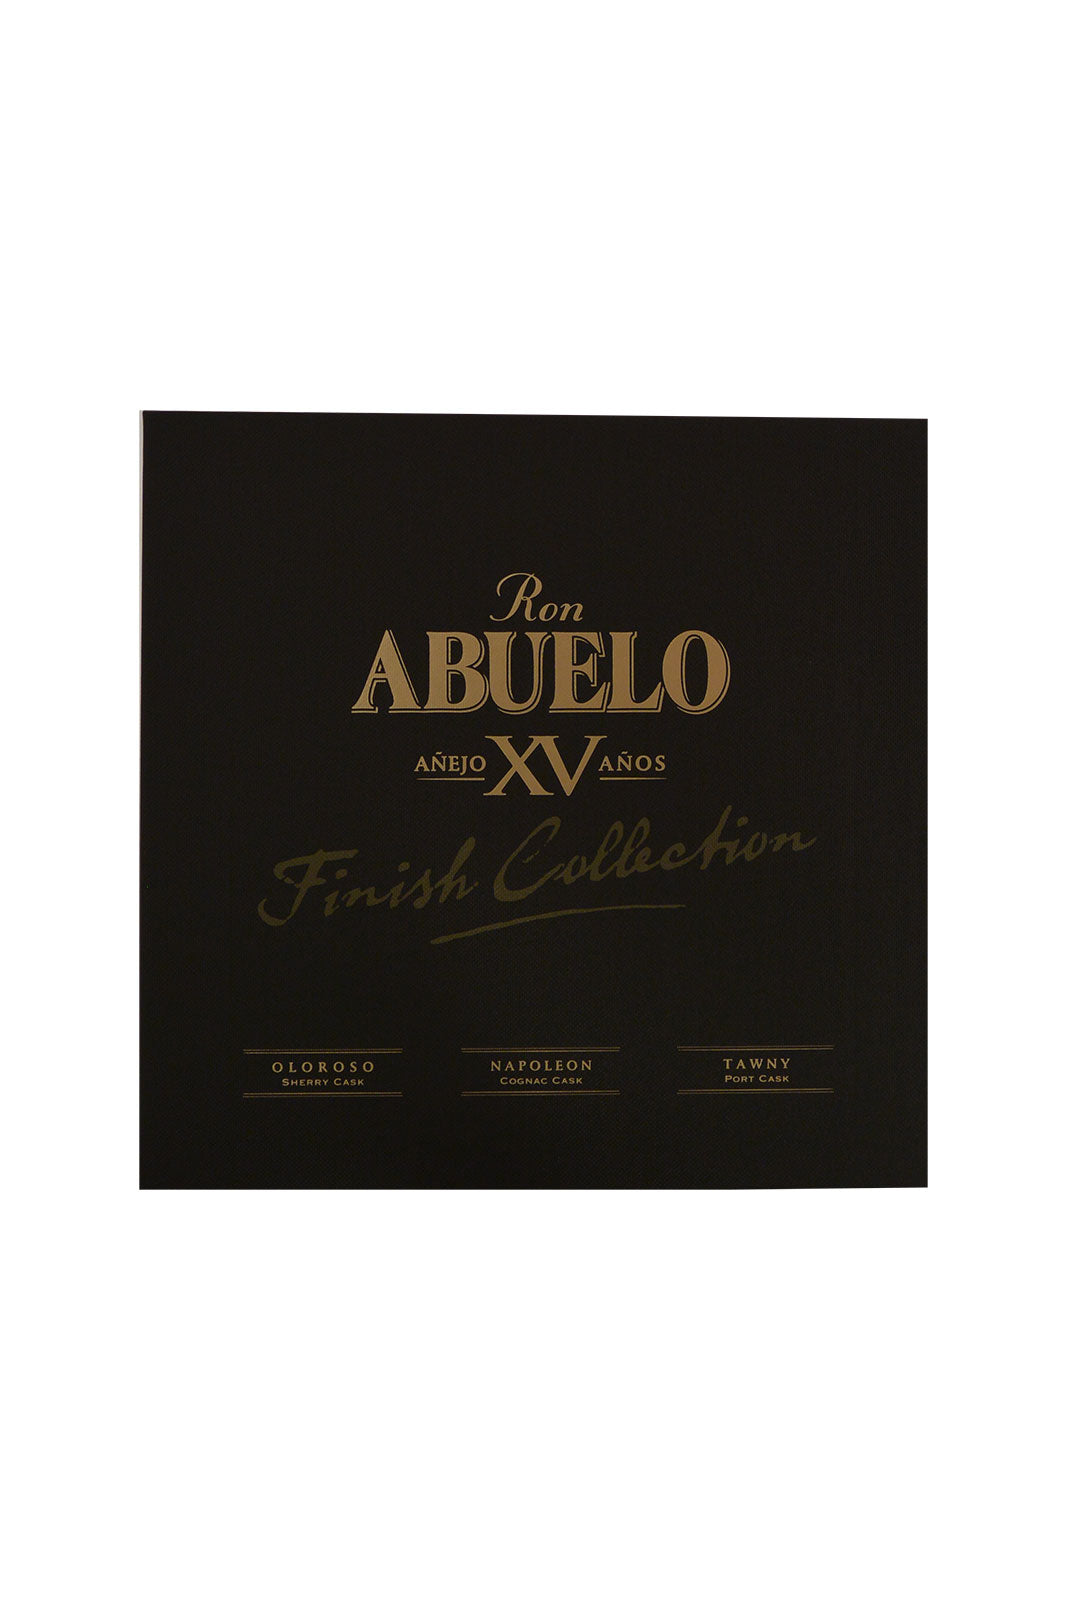 Abuelo XV Años (Giftbox with 3 Bottles of 20cl)